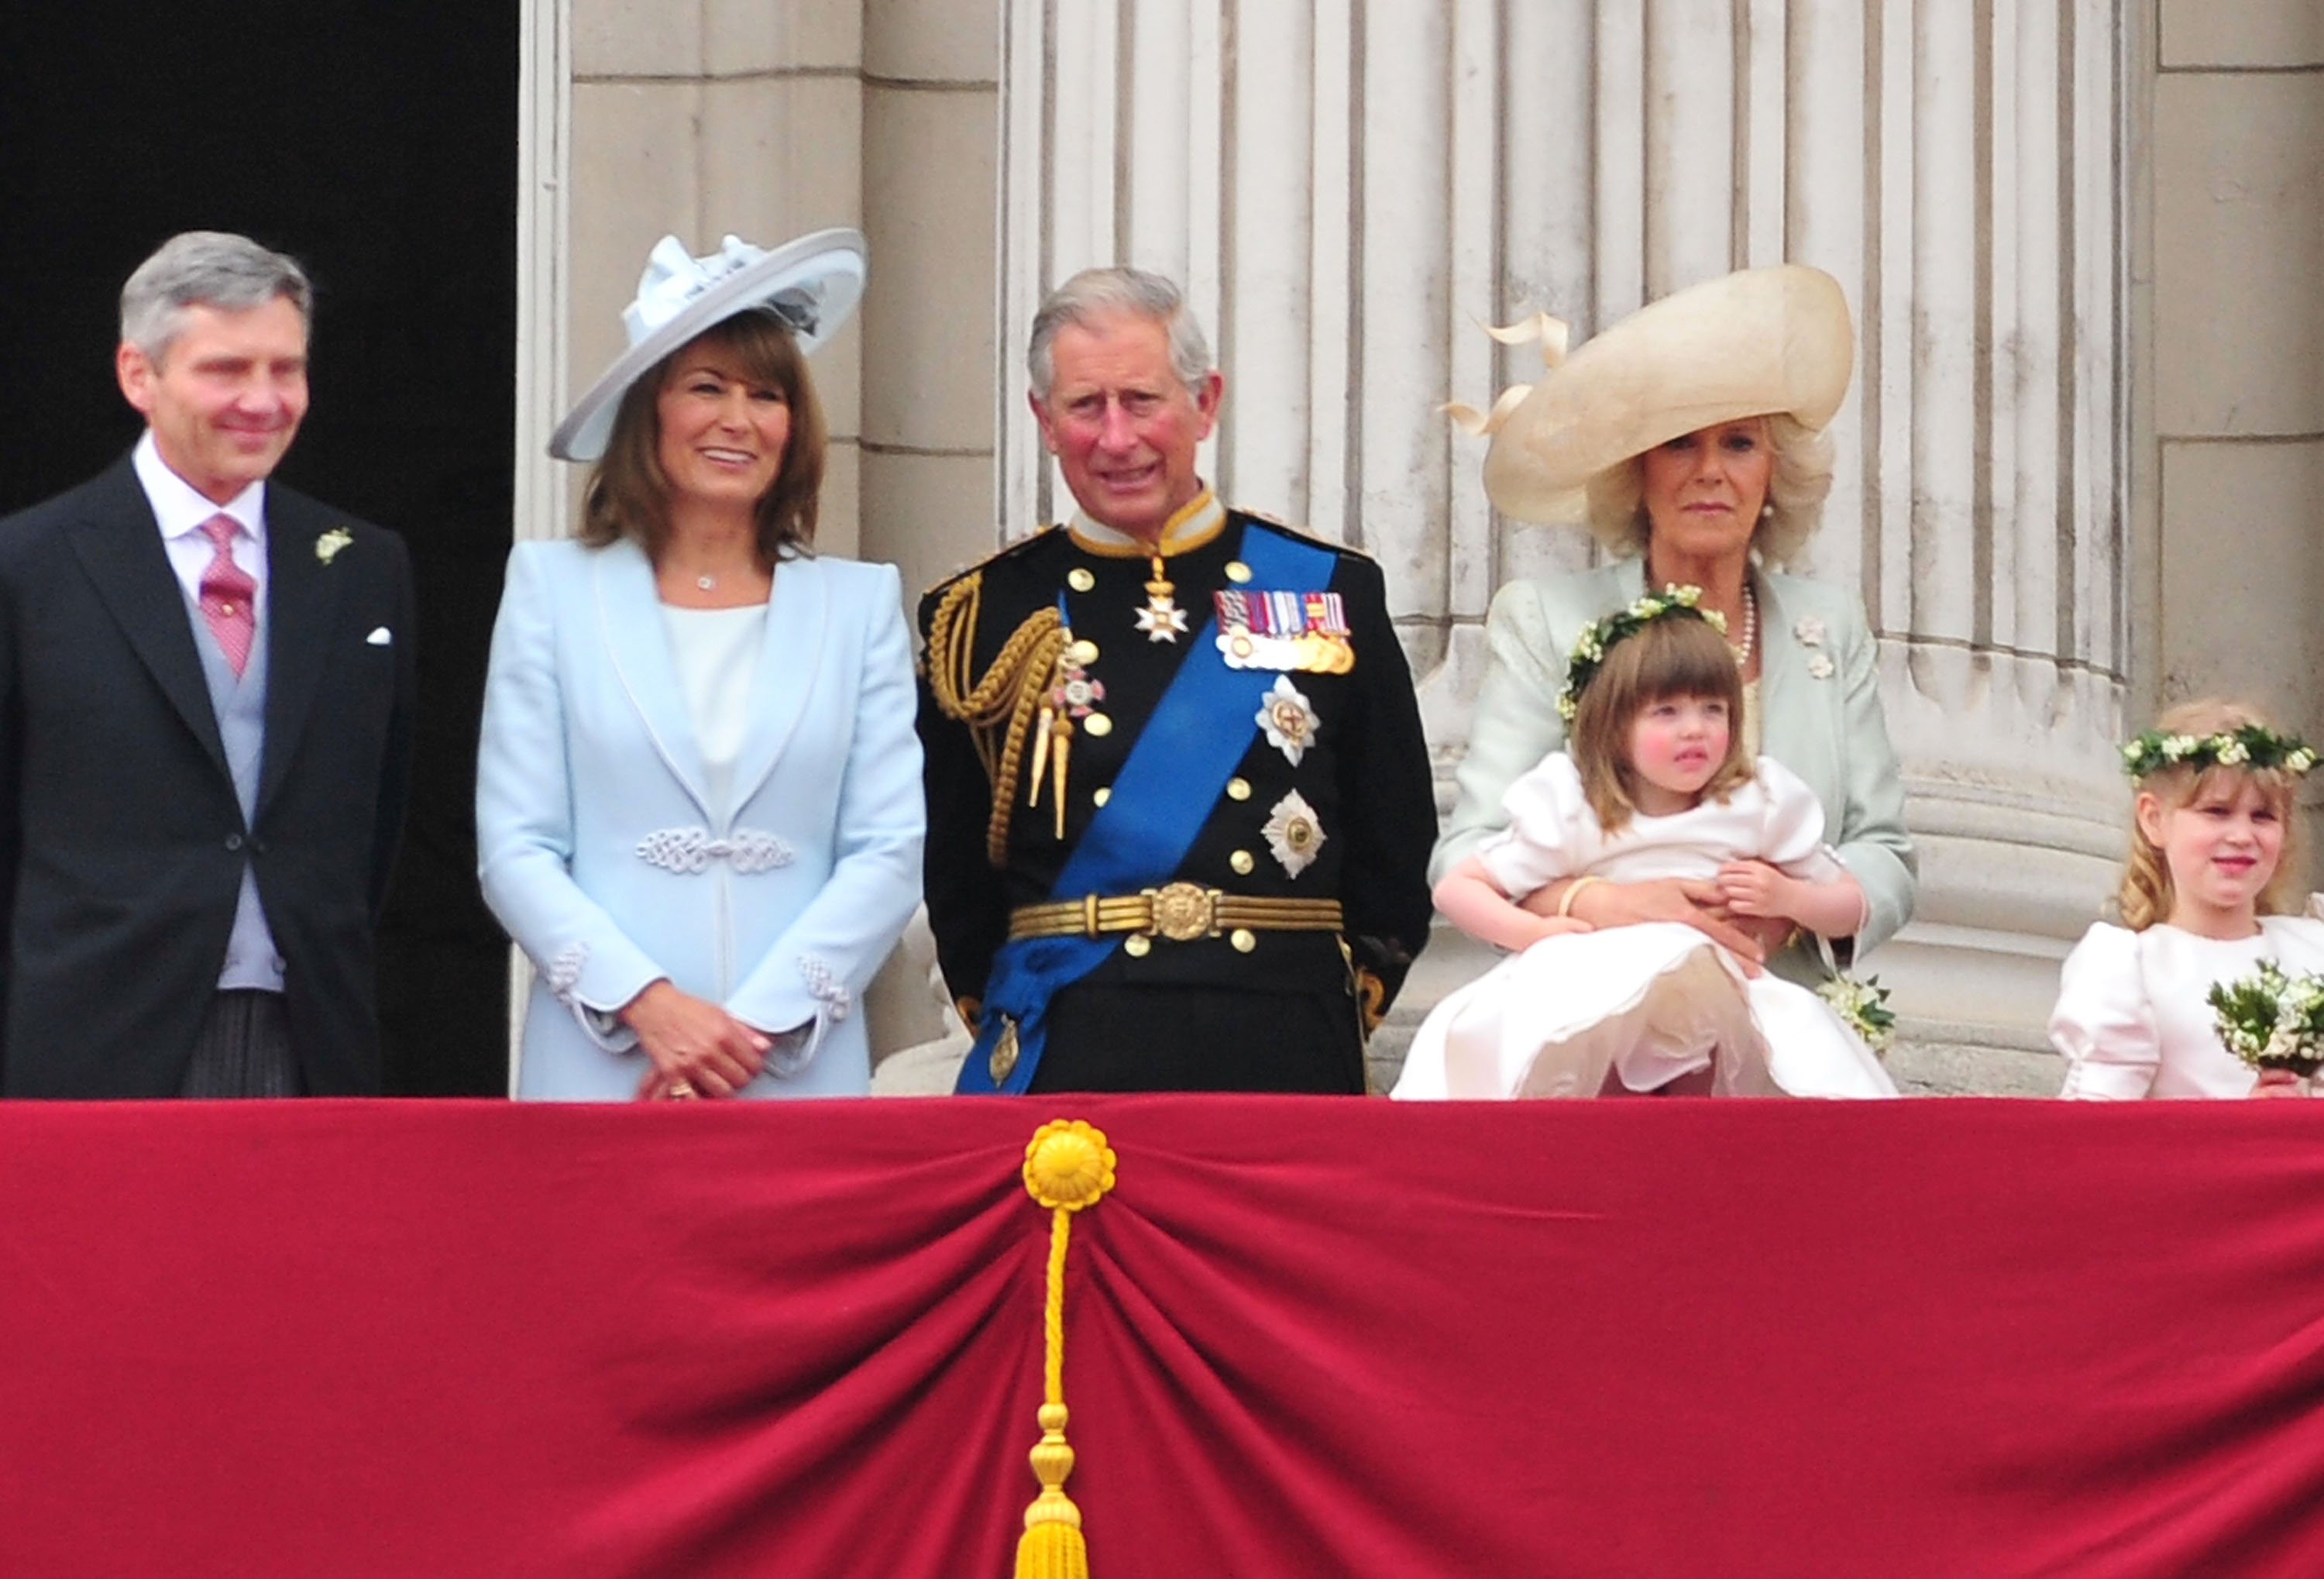 Michael Middleton, Carole Middleton, Eliza Lopes, King Charles, Queen Camilla, and Lady Louise Windsor greet crowd of admirers at the Buckingham Palace in London, England, on April 29, 2011. | Source: Getty Images